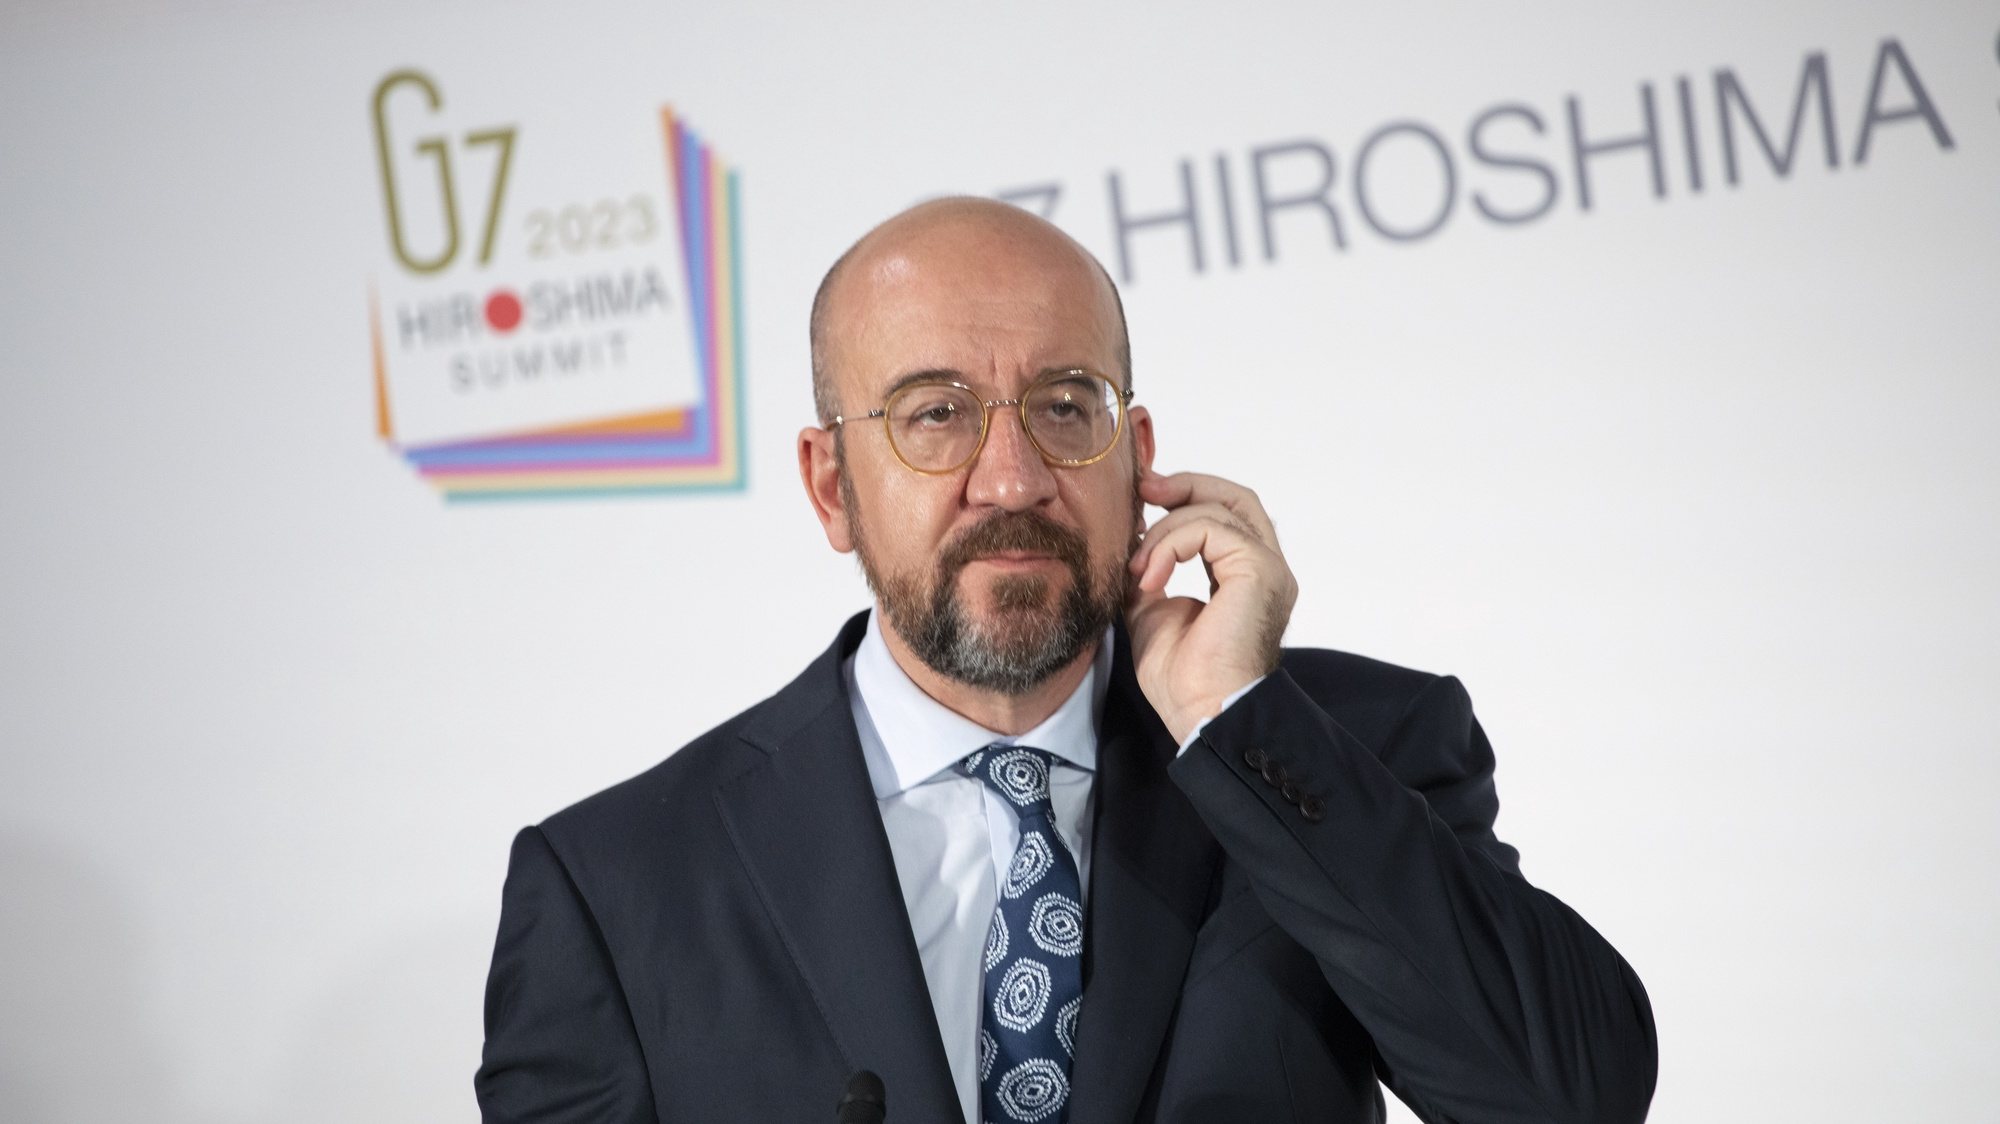 epa10637914 European Council President Charles Michel speaks to reporters during a press briefing on the sidelines of the G7 Hiroshima Summit in Hiroshima, Japan, 19 May 2023. The G7 Hiroshima Summit will be held from 19 to 21 May 2023.  EPA/HOW HWEE YOUNG